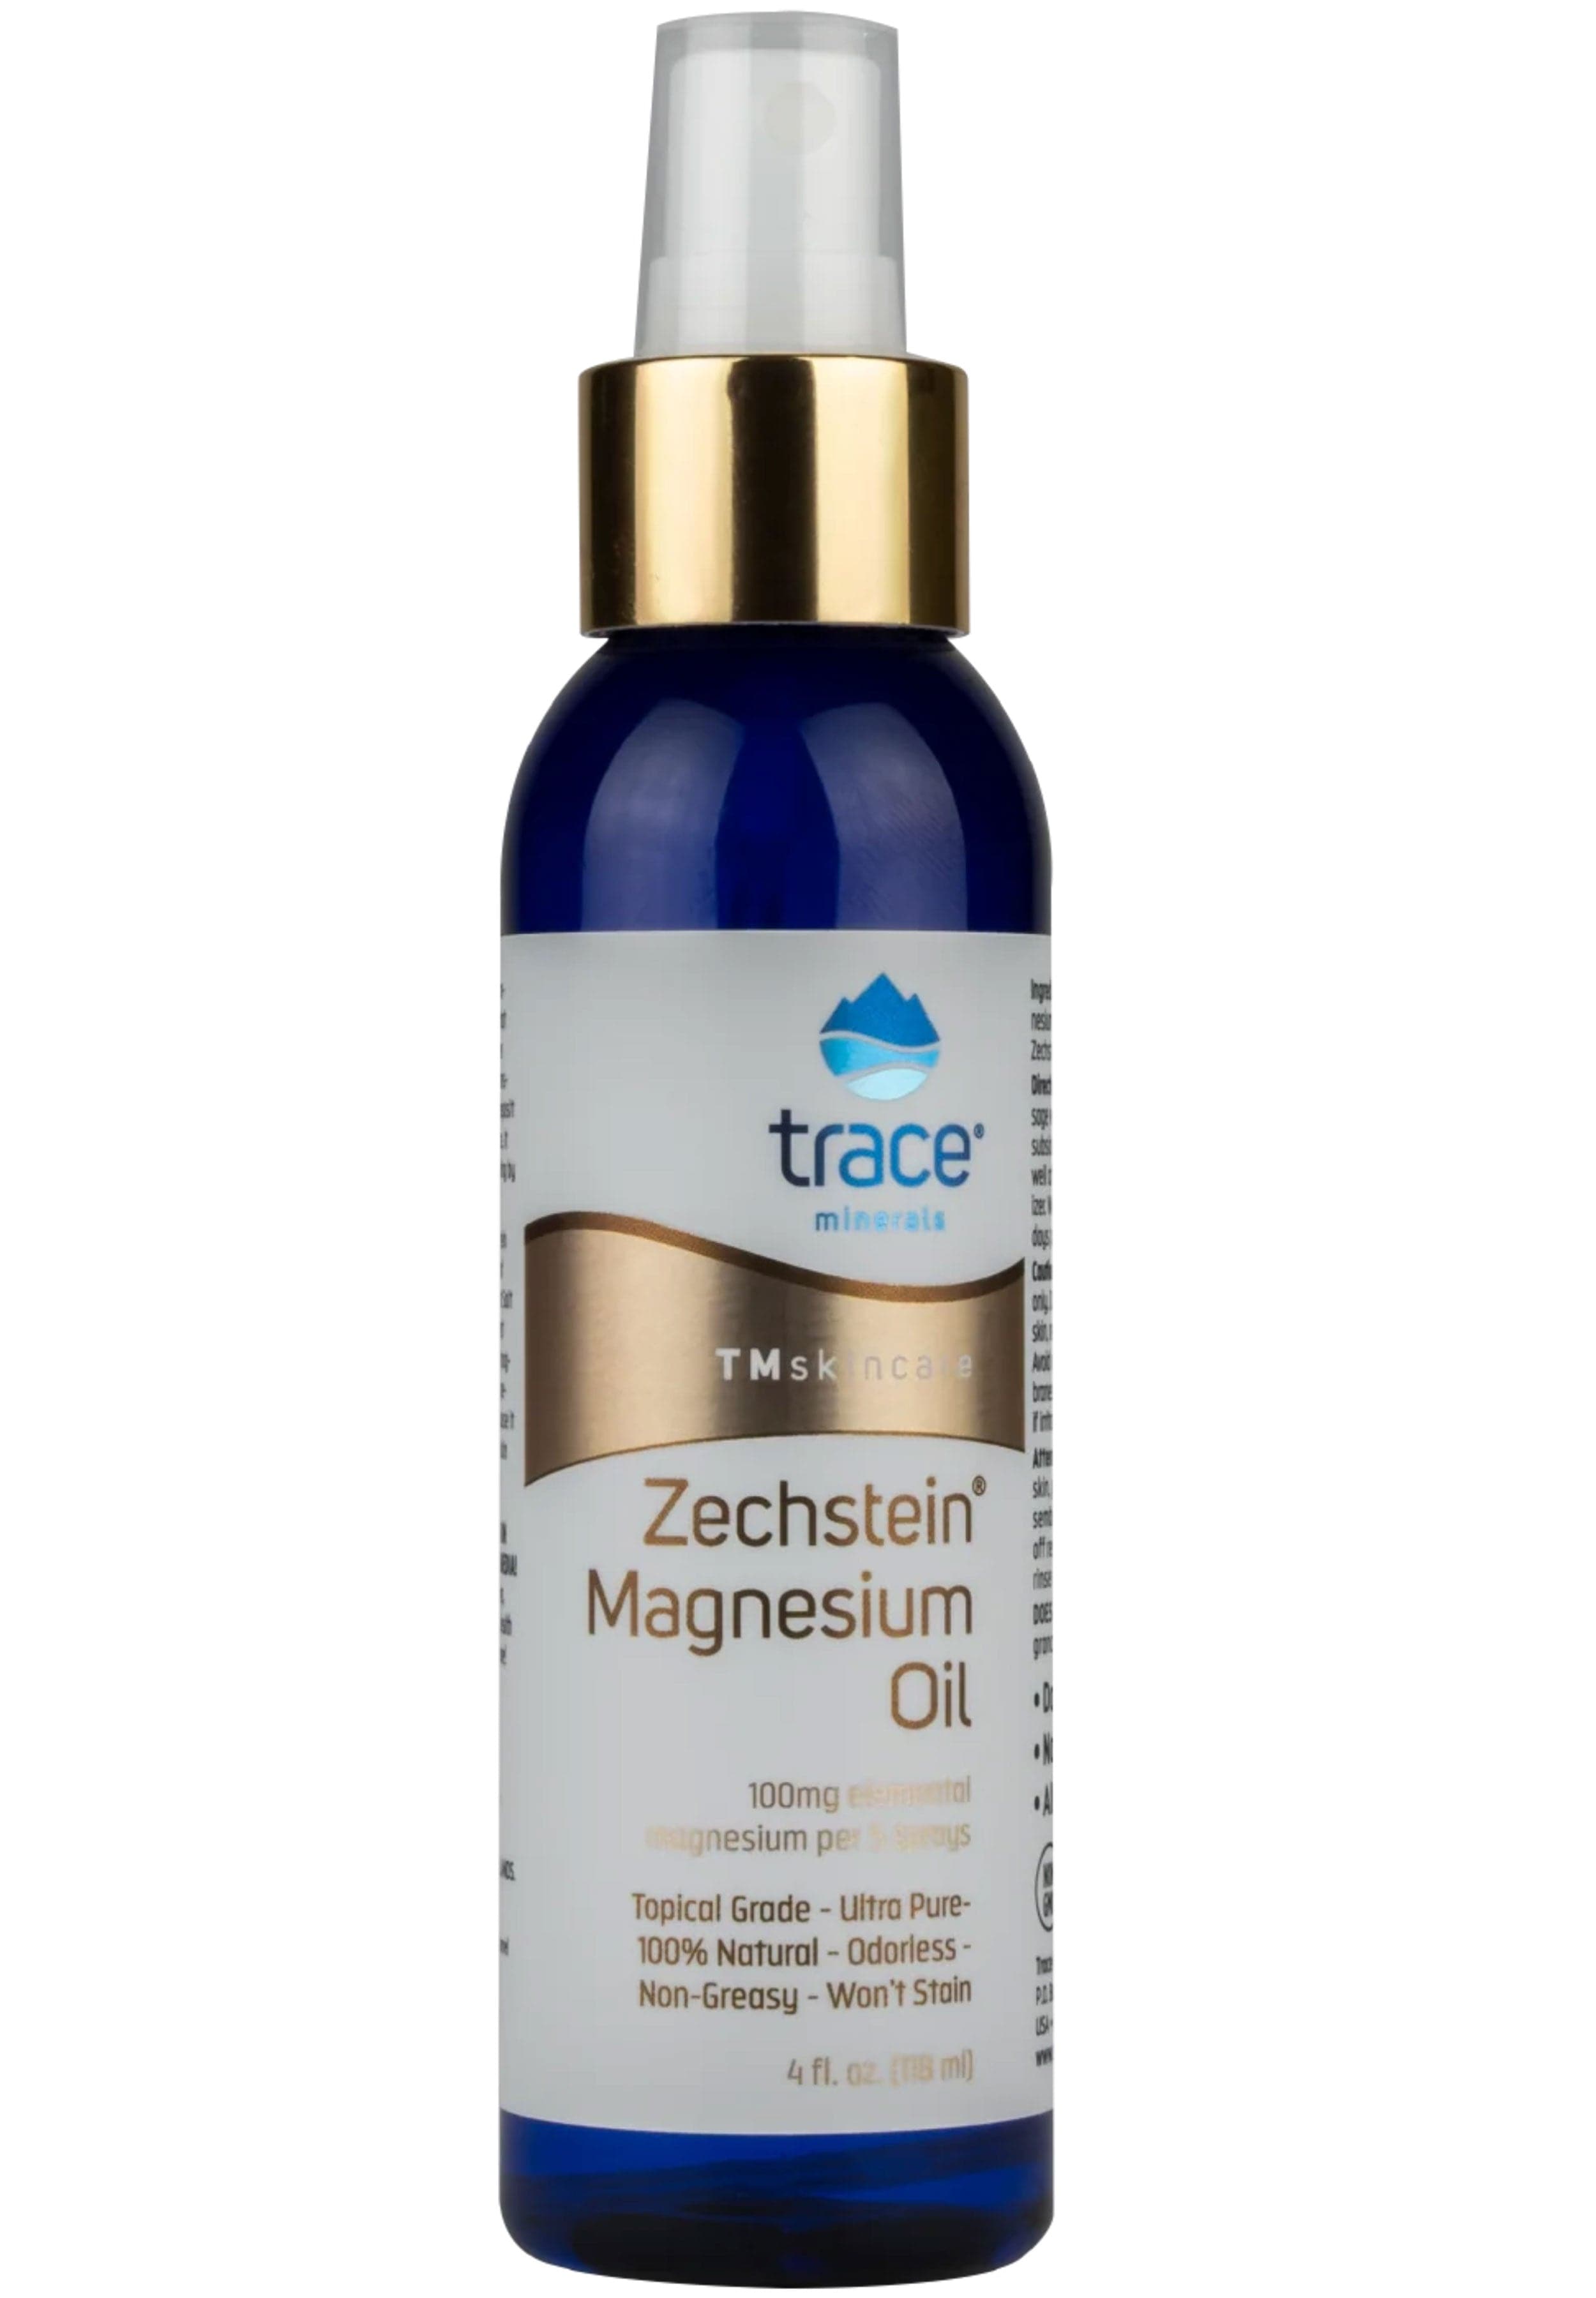 Trace Minerals Research TMskincare Zechstein Magnesium Oil